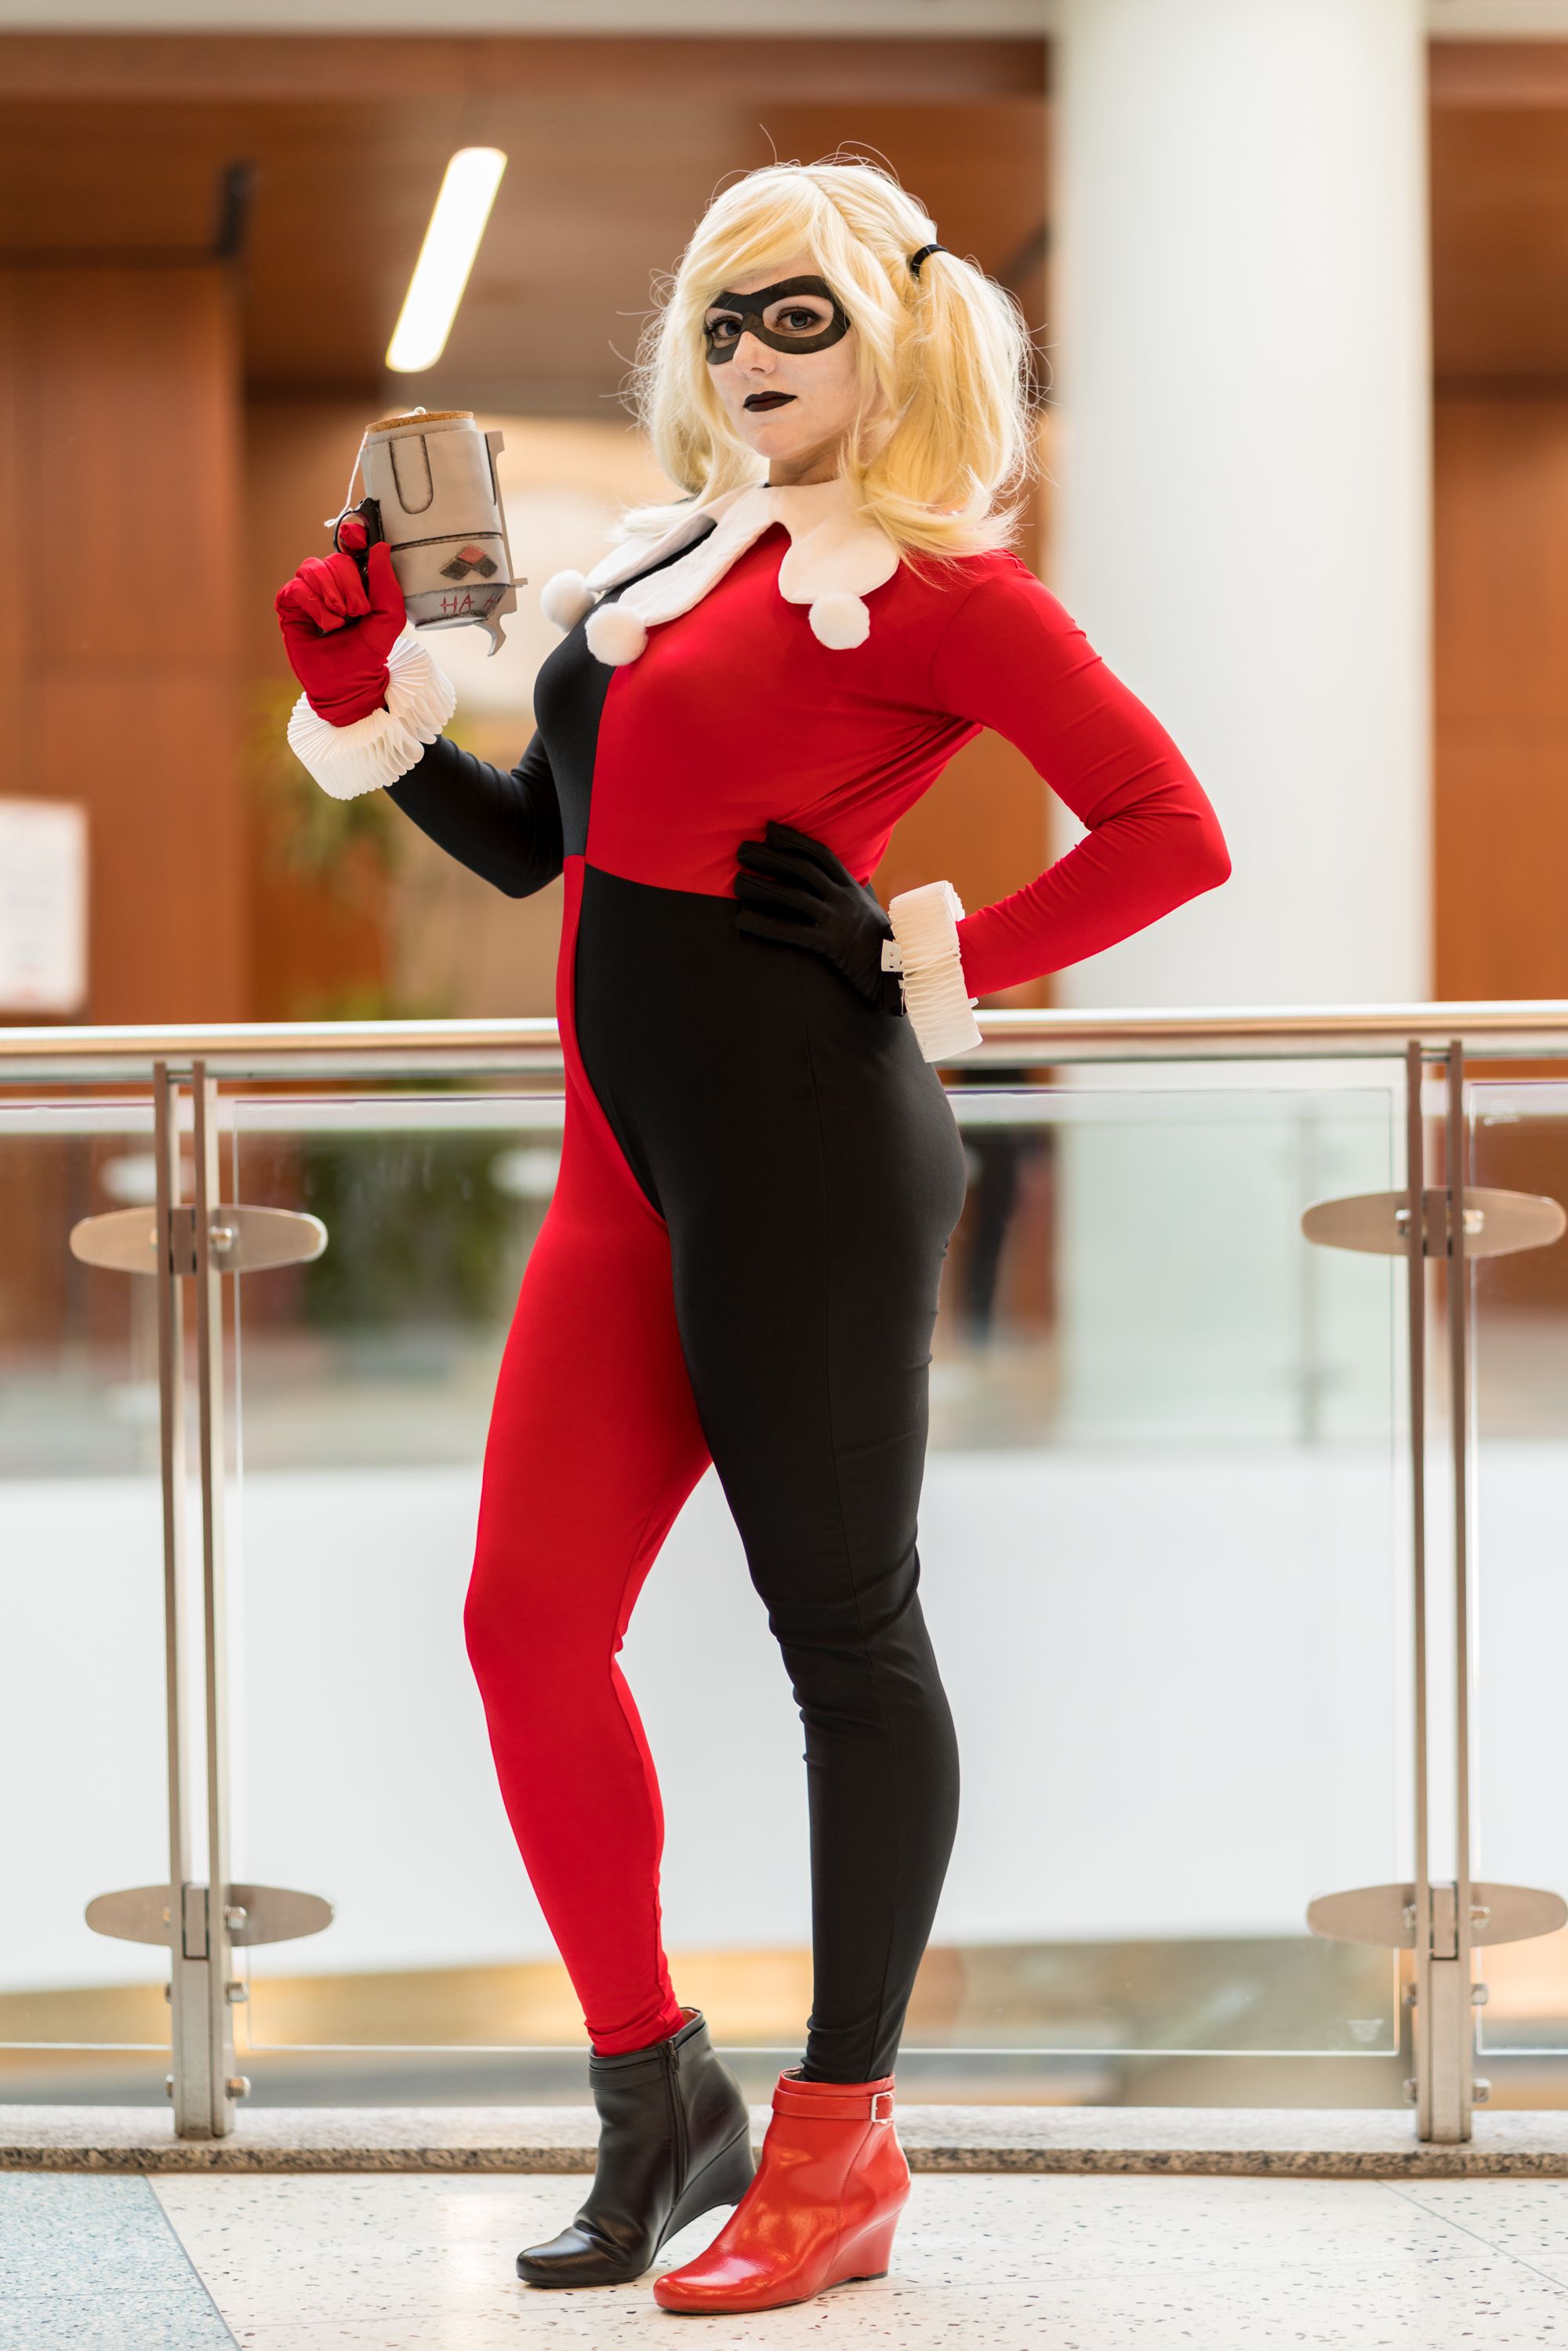 Harley Quin Cosplay Porn overwatch blowjob